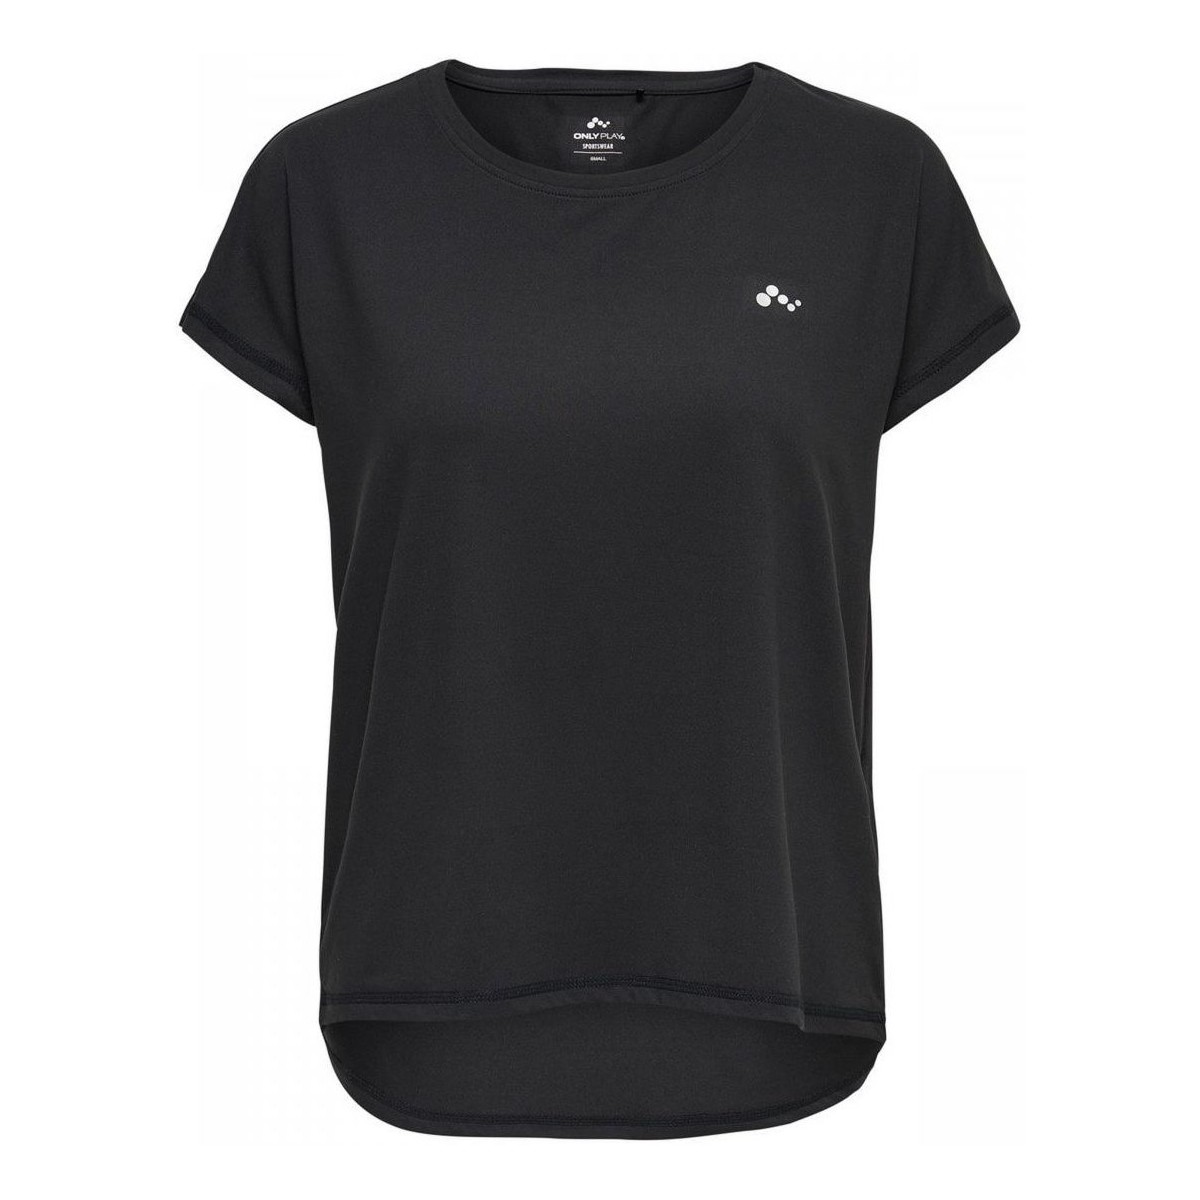 textil Mujer Tops y Camisetas Only Play 15137012 LOOSE-BLACK Negro